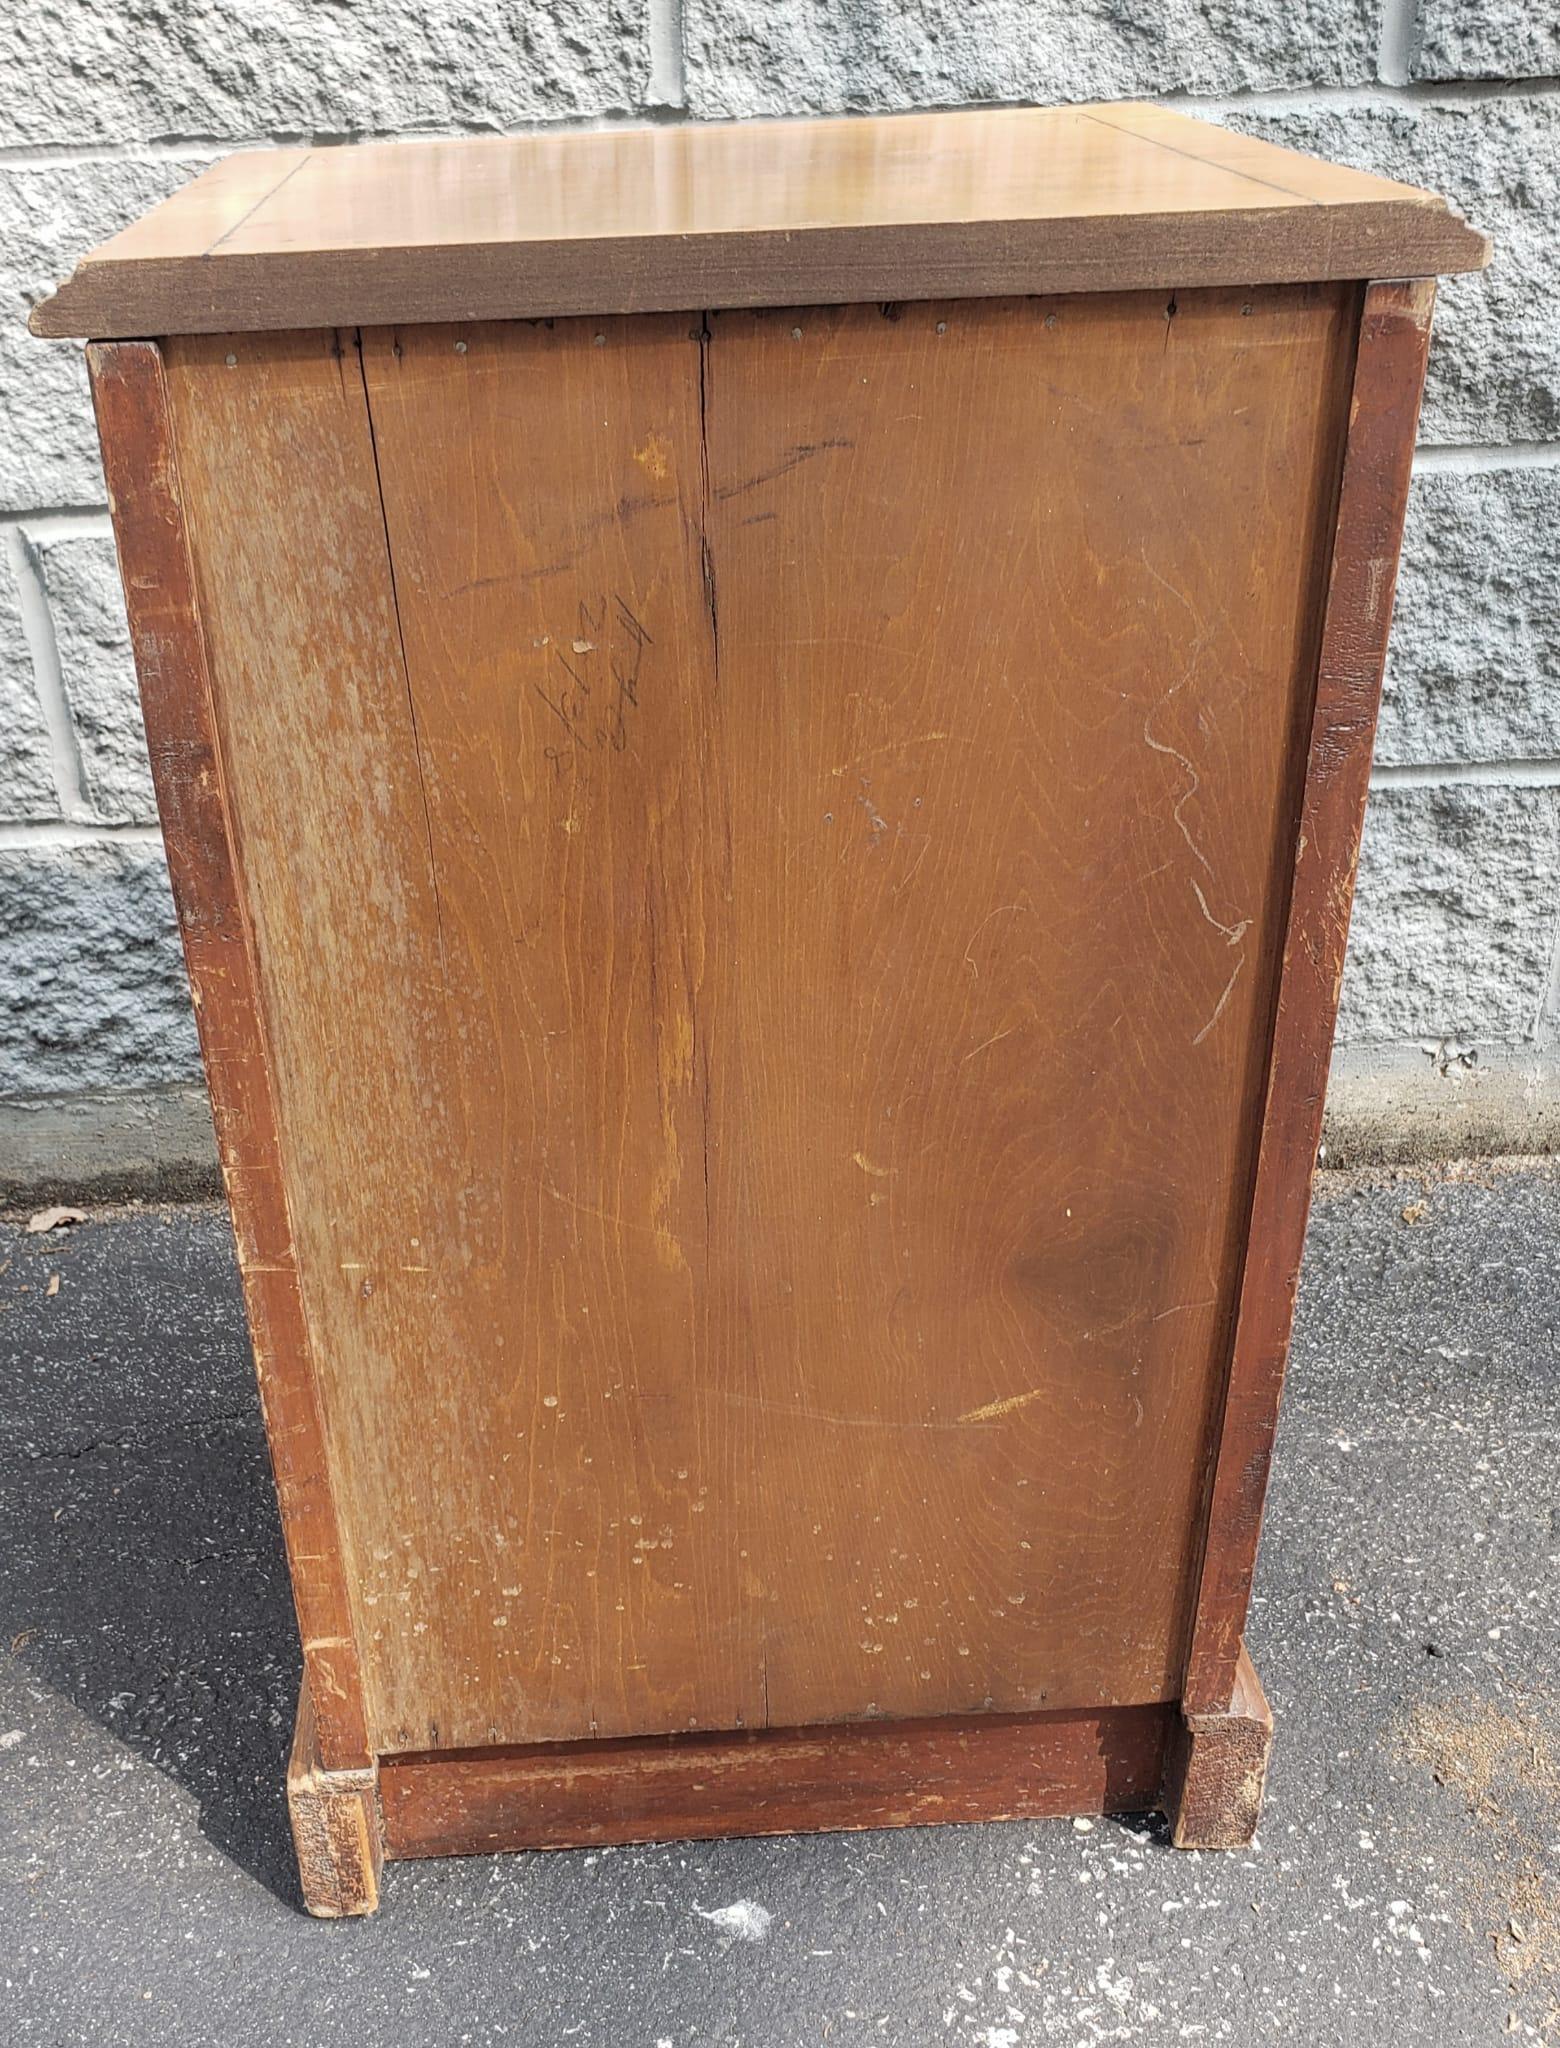 1900s Edwardian Inlaid Maple Side Cabinet In Good Condition For Sale In Germantown, MD